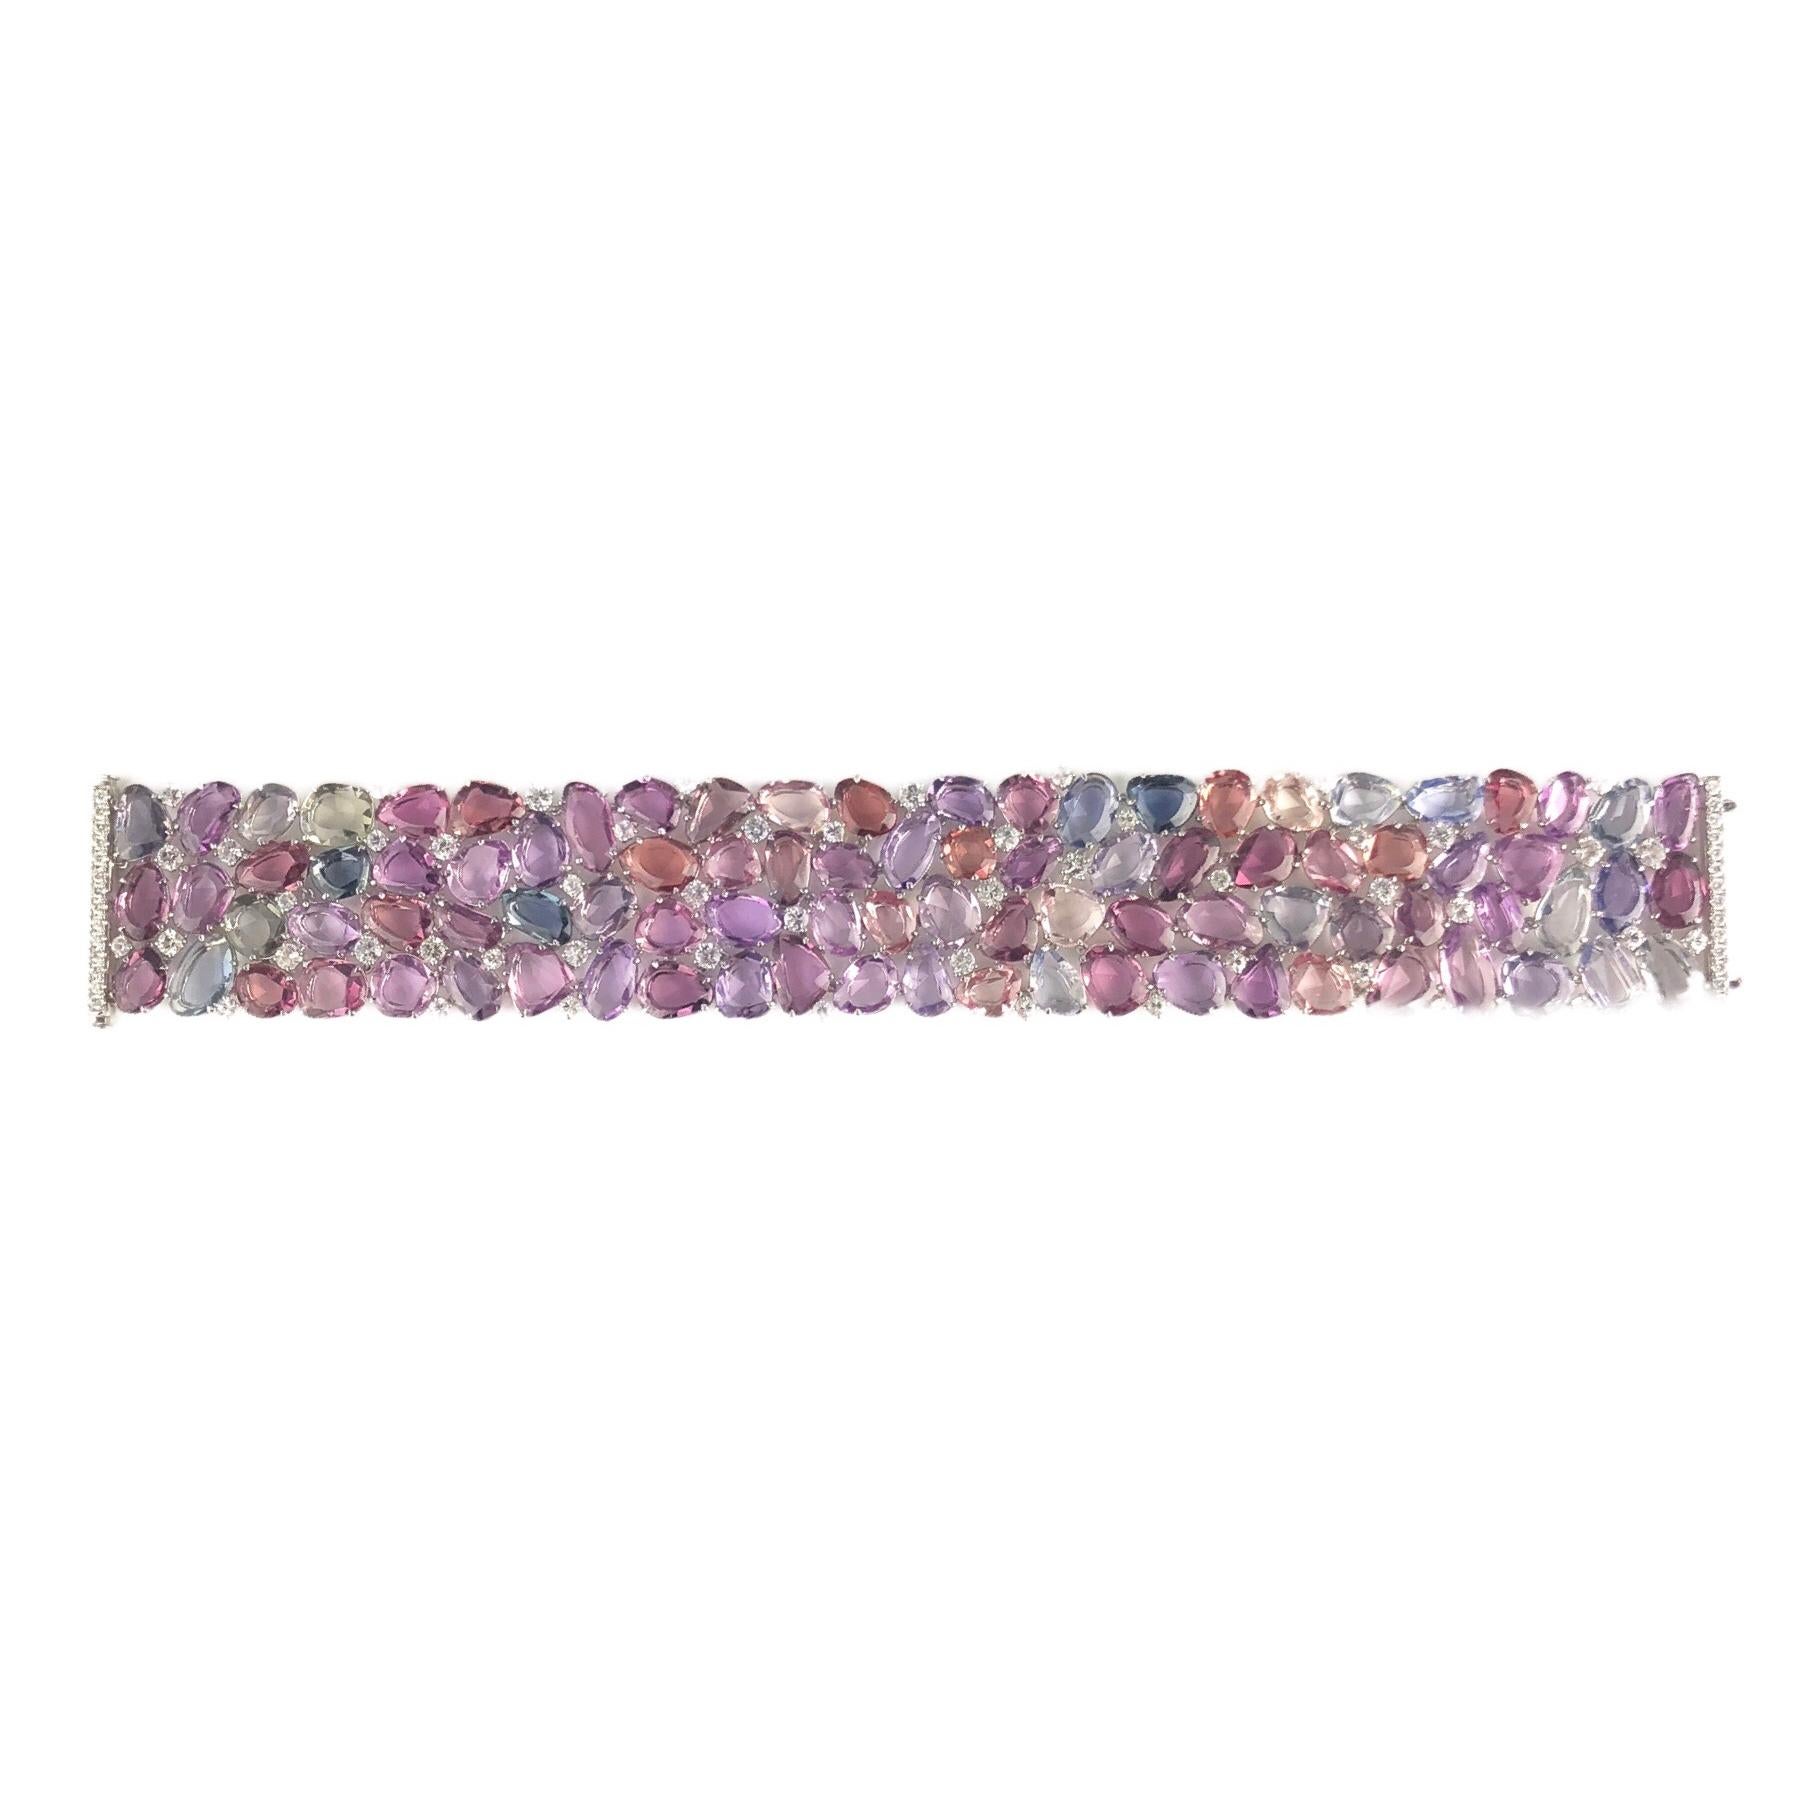 (DiamondTown) This stunning bracelet features 96.05 carats multicolor sapphires. The sapphire colors are various shades of pink, purple, green, blue, yellow, and peach, with 51 white sapphires in the mix as well. 28 round diamonds (total weight 0.44